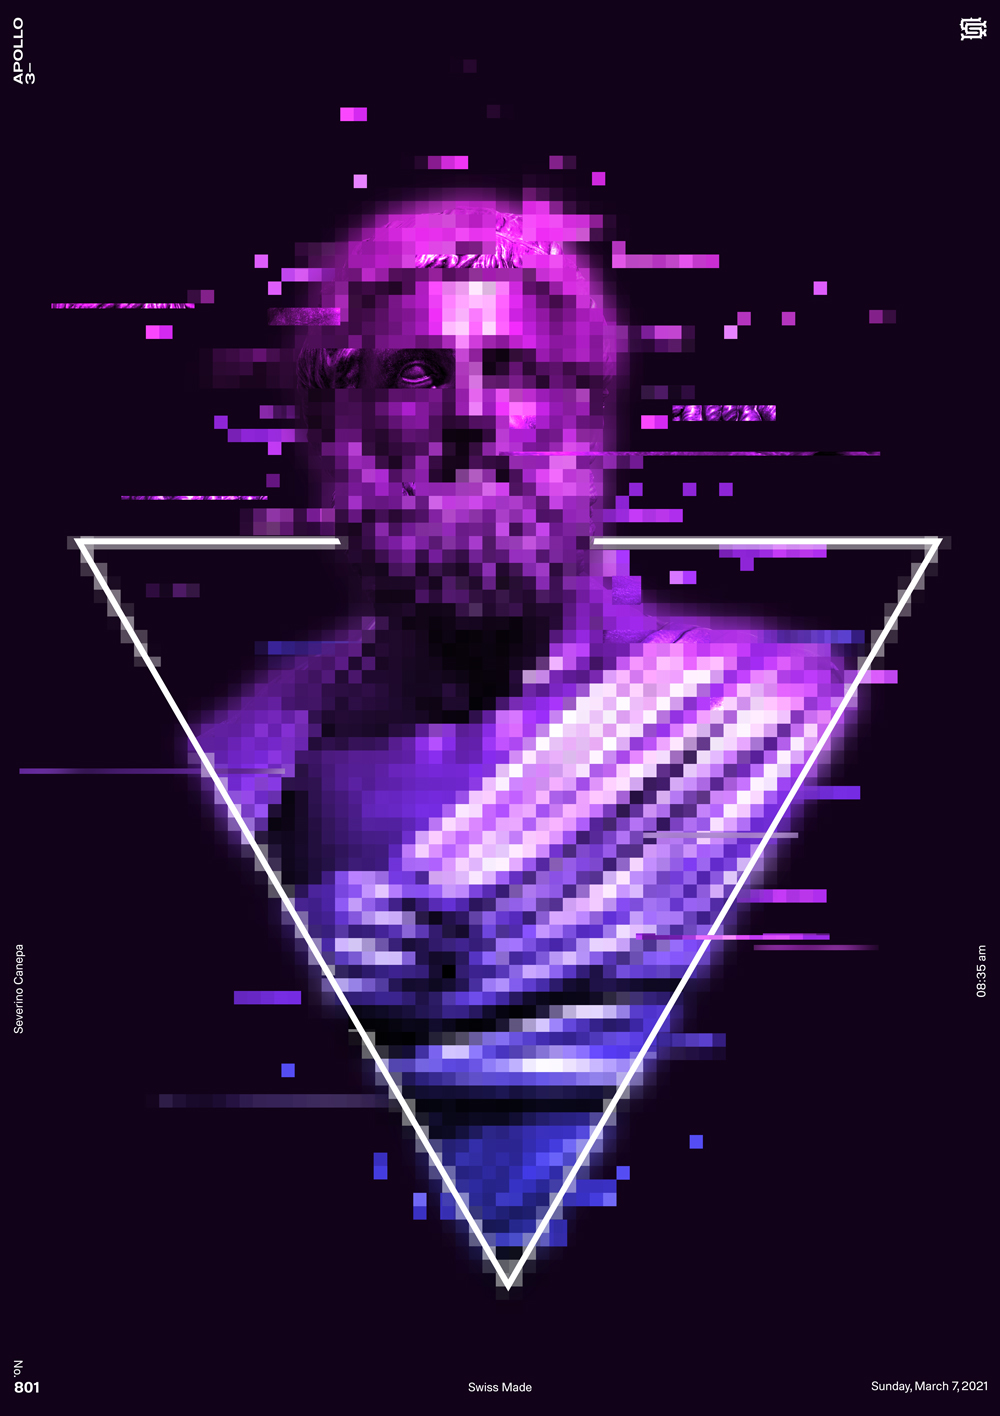 Visual artwork mixing 3D, vaporwave design, statue, and glitch effect